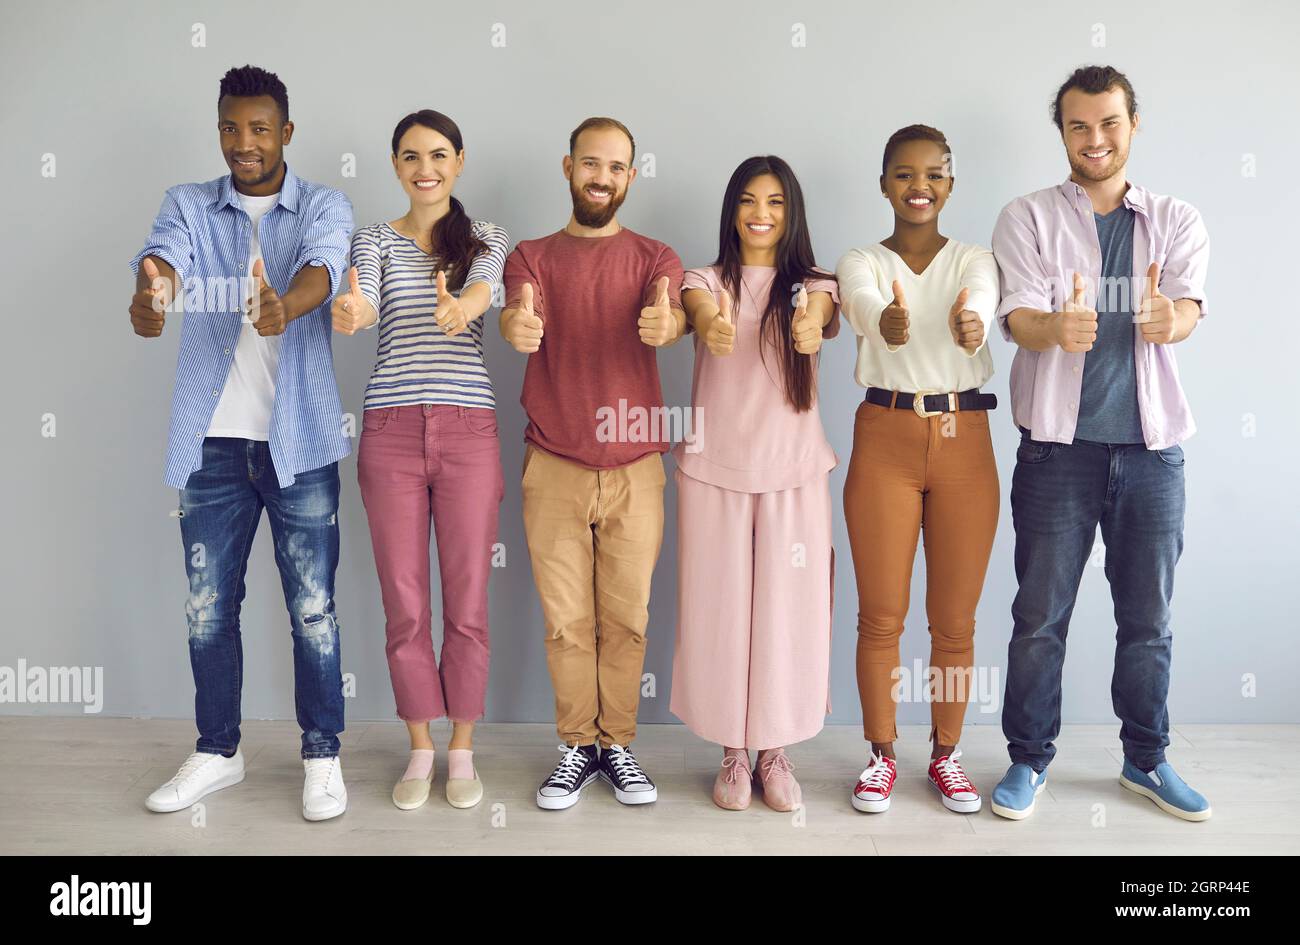 Group of Diverse People Stand Together in home. Stock Photo